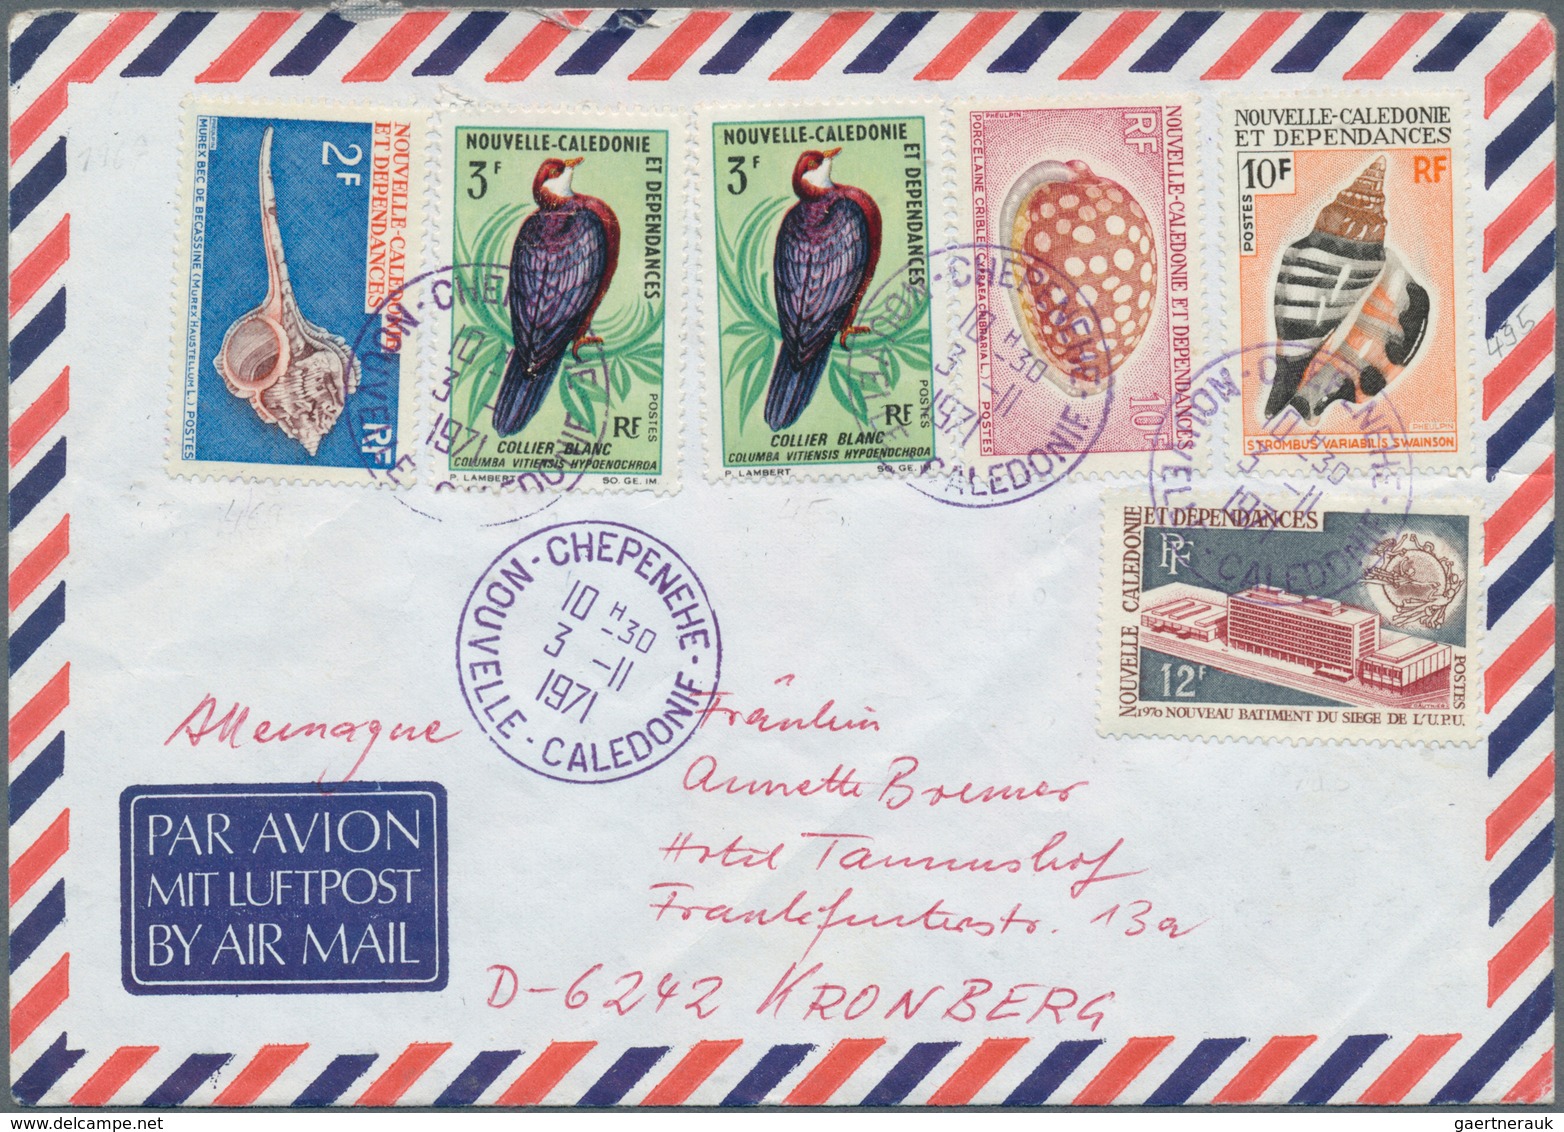 23705 Neukaledonien: 1900/1990 (ca.), collection of apprx. 130 covers/cards/ppc with plenty of interesting